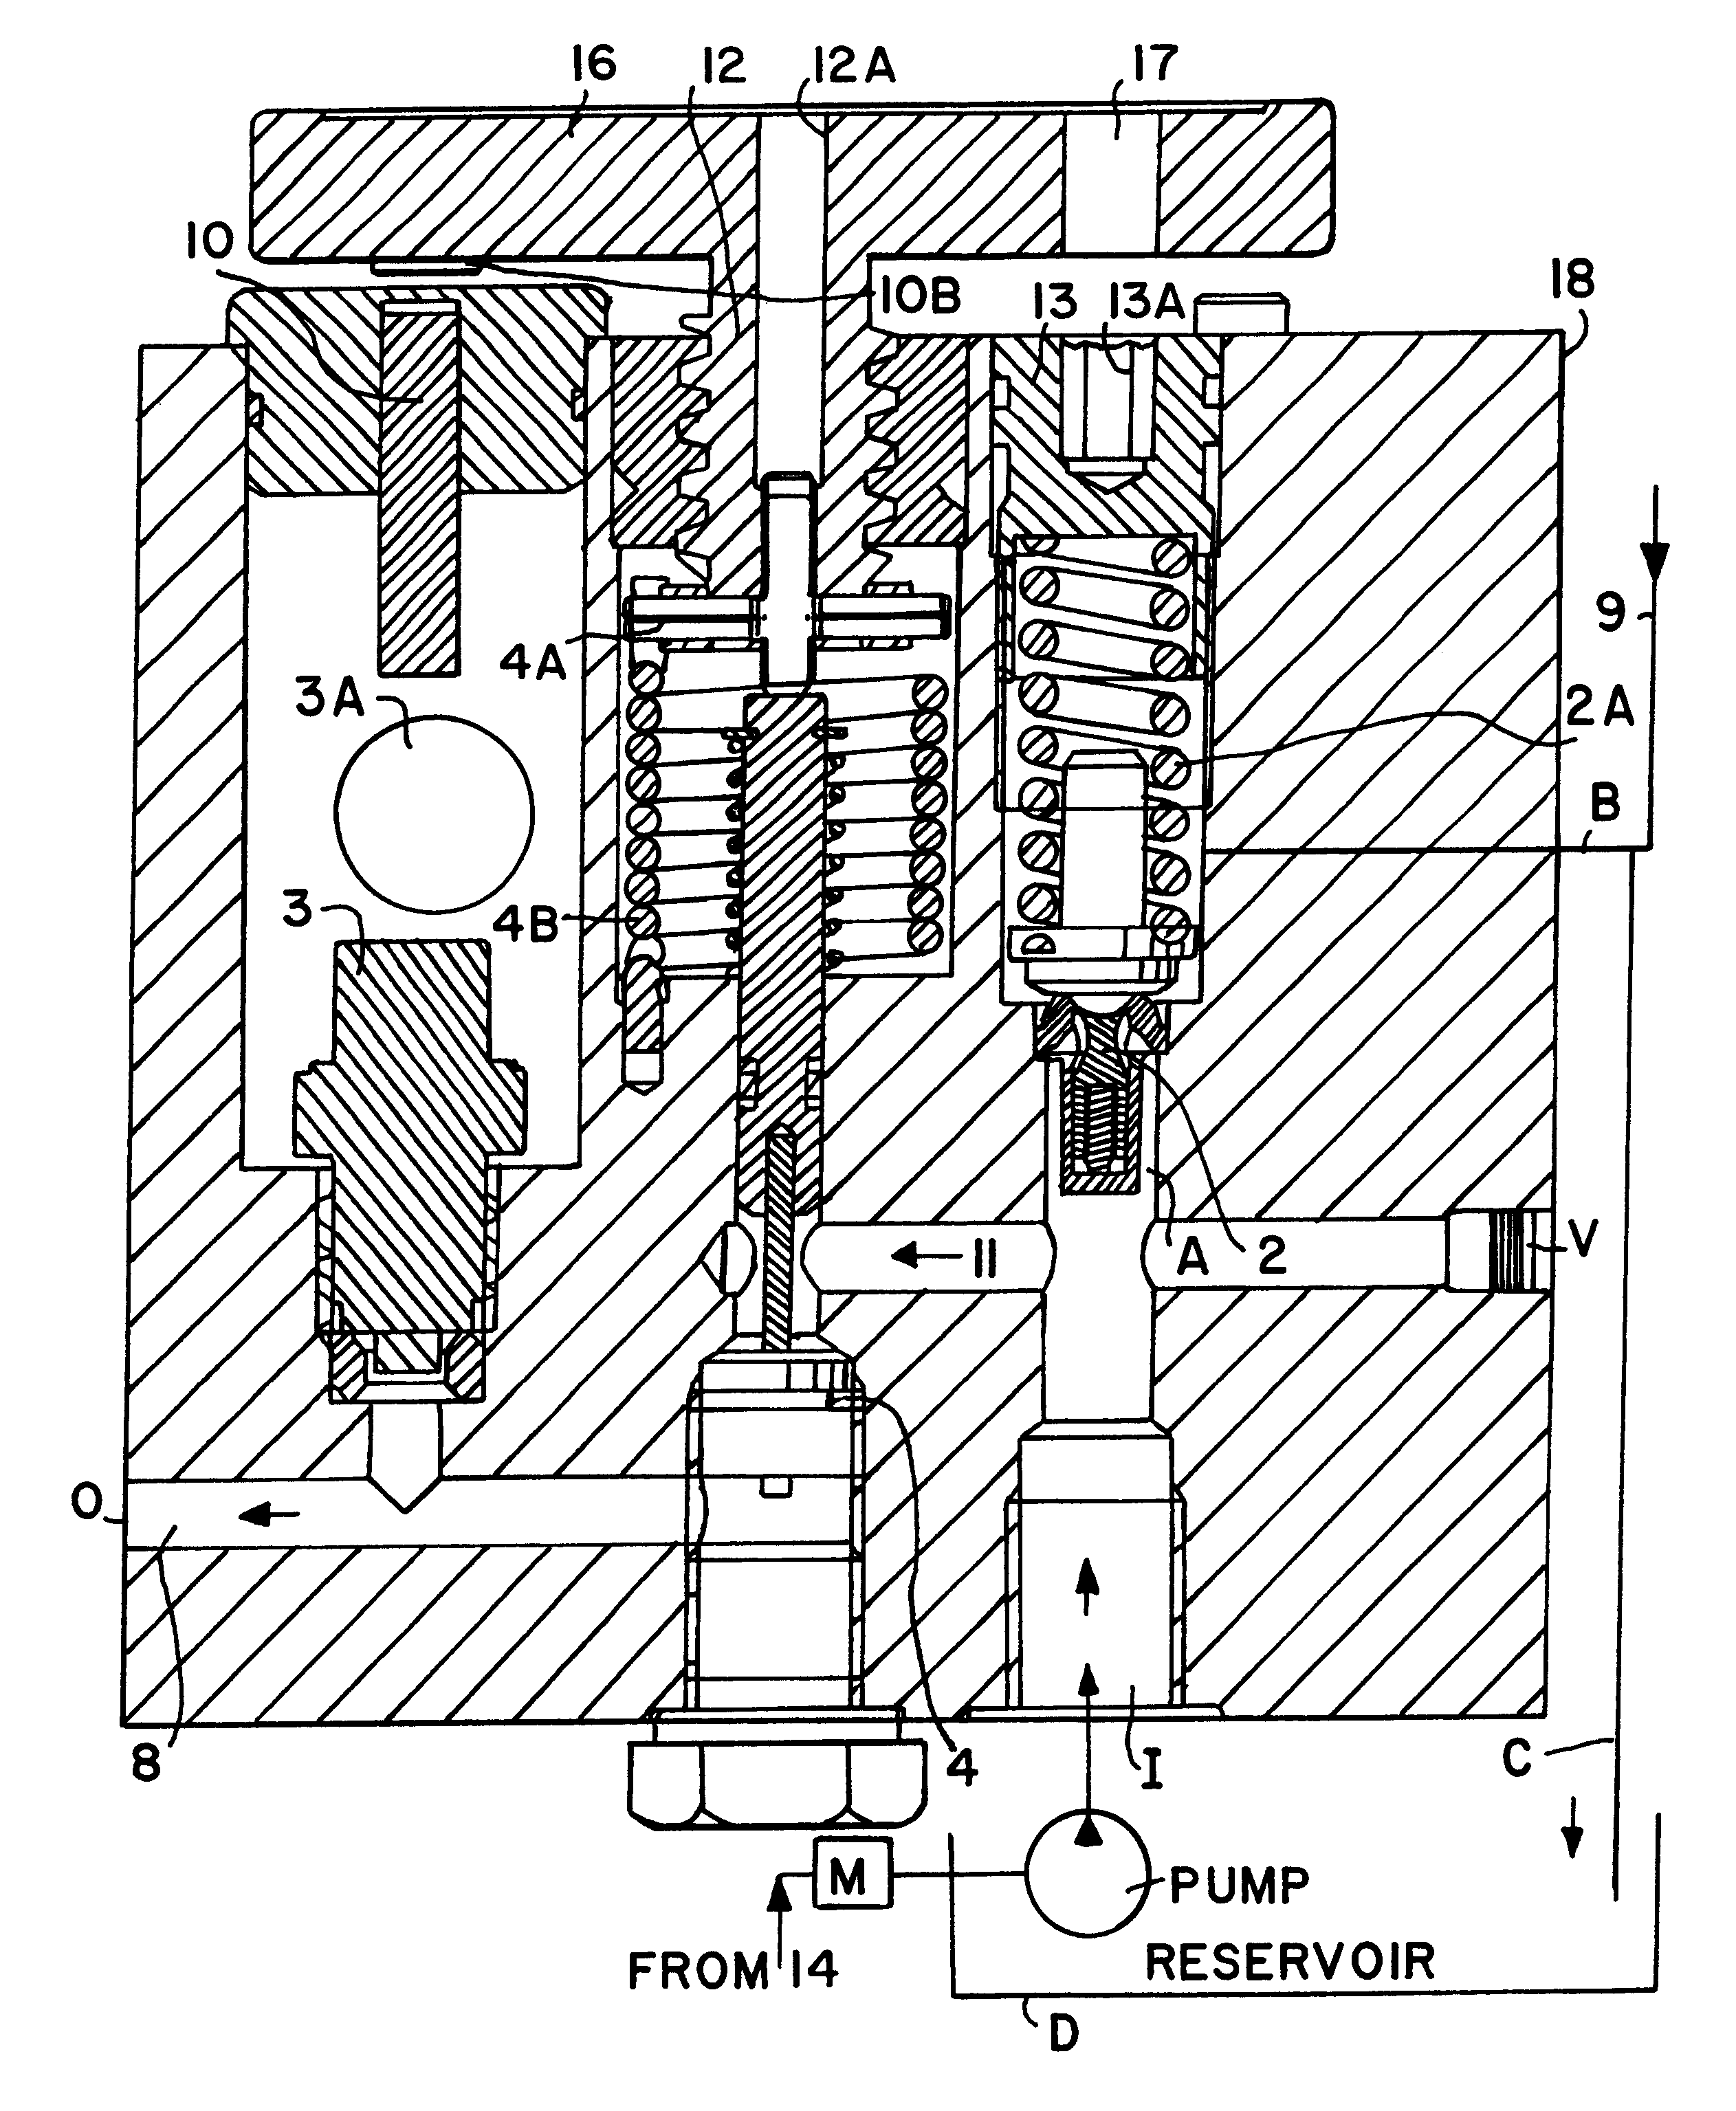 Apparatus and method for controlling a rated system pressure